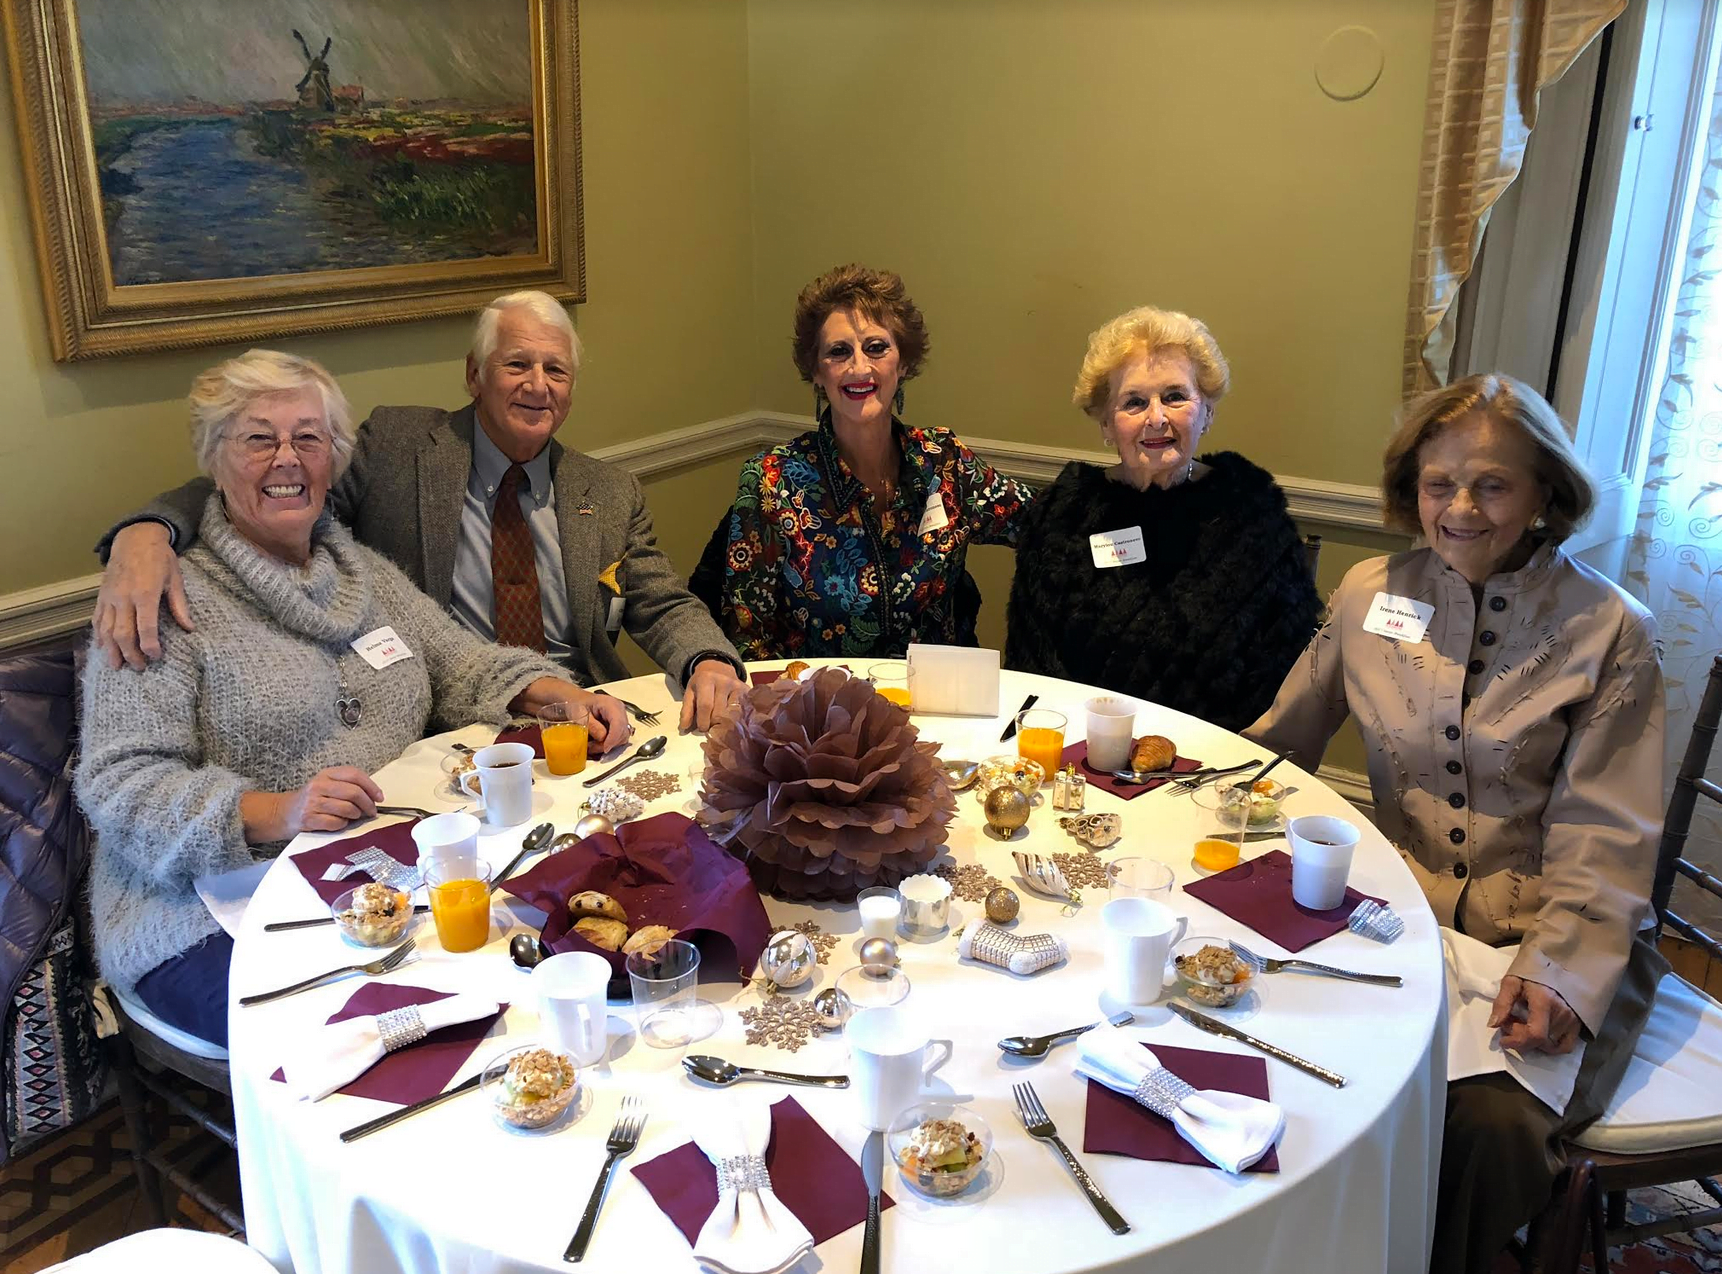 The Junior League of Greenwich, as part of its Enchanted Forest event, hosted seniors in a festive Senior Breakfast in the historic Tomes-Higgins.